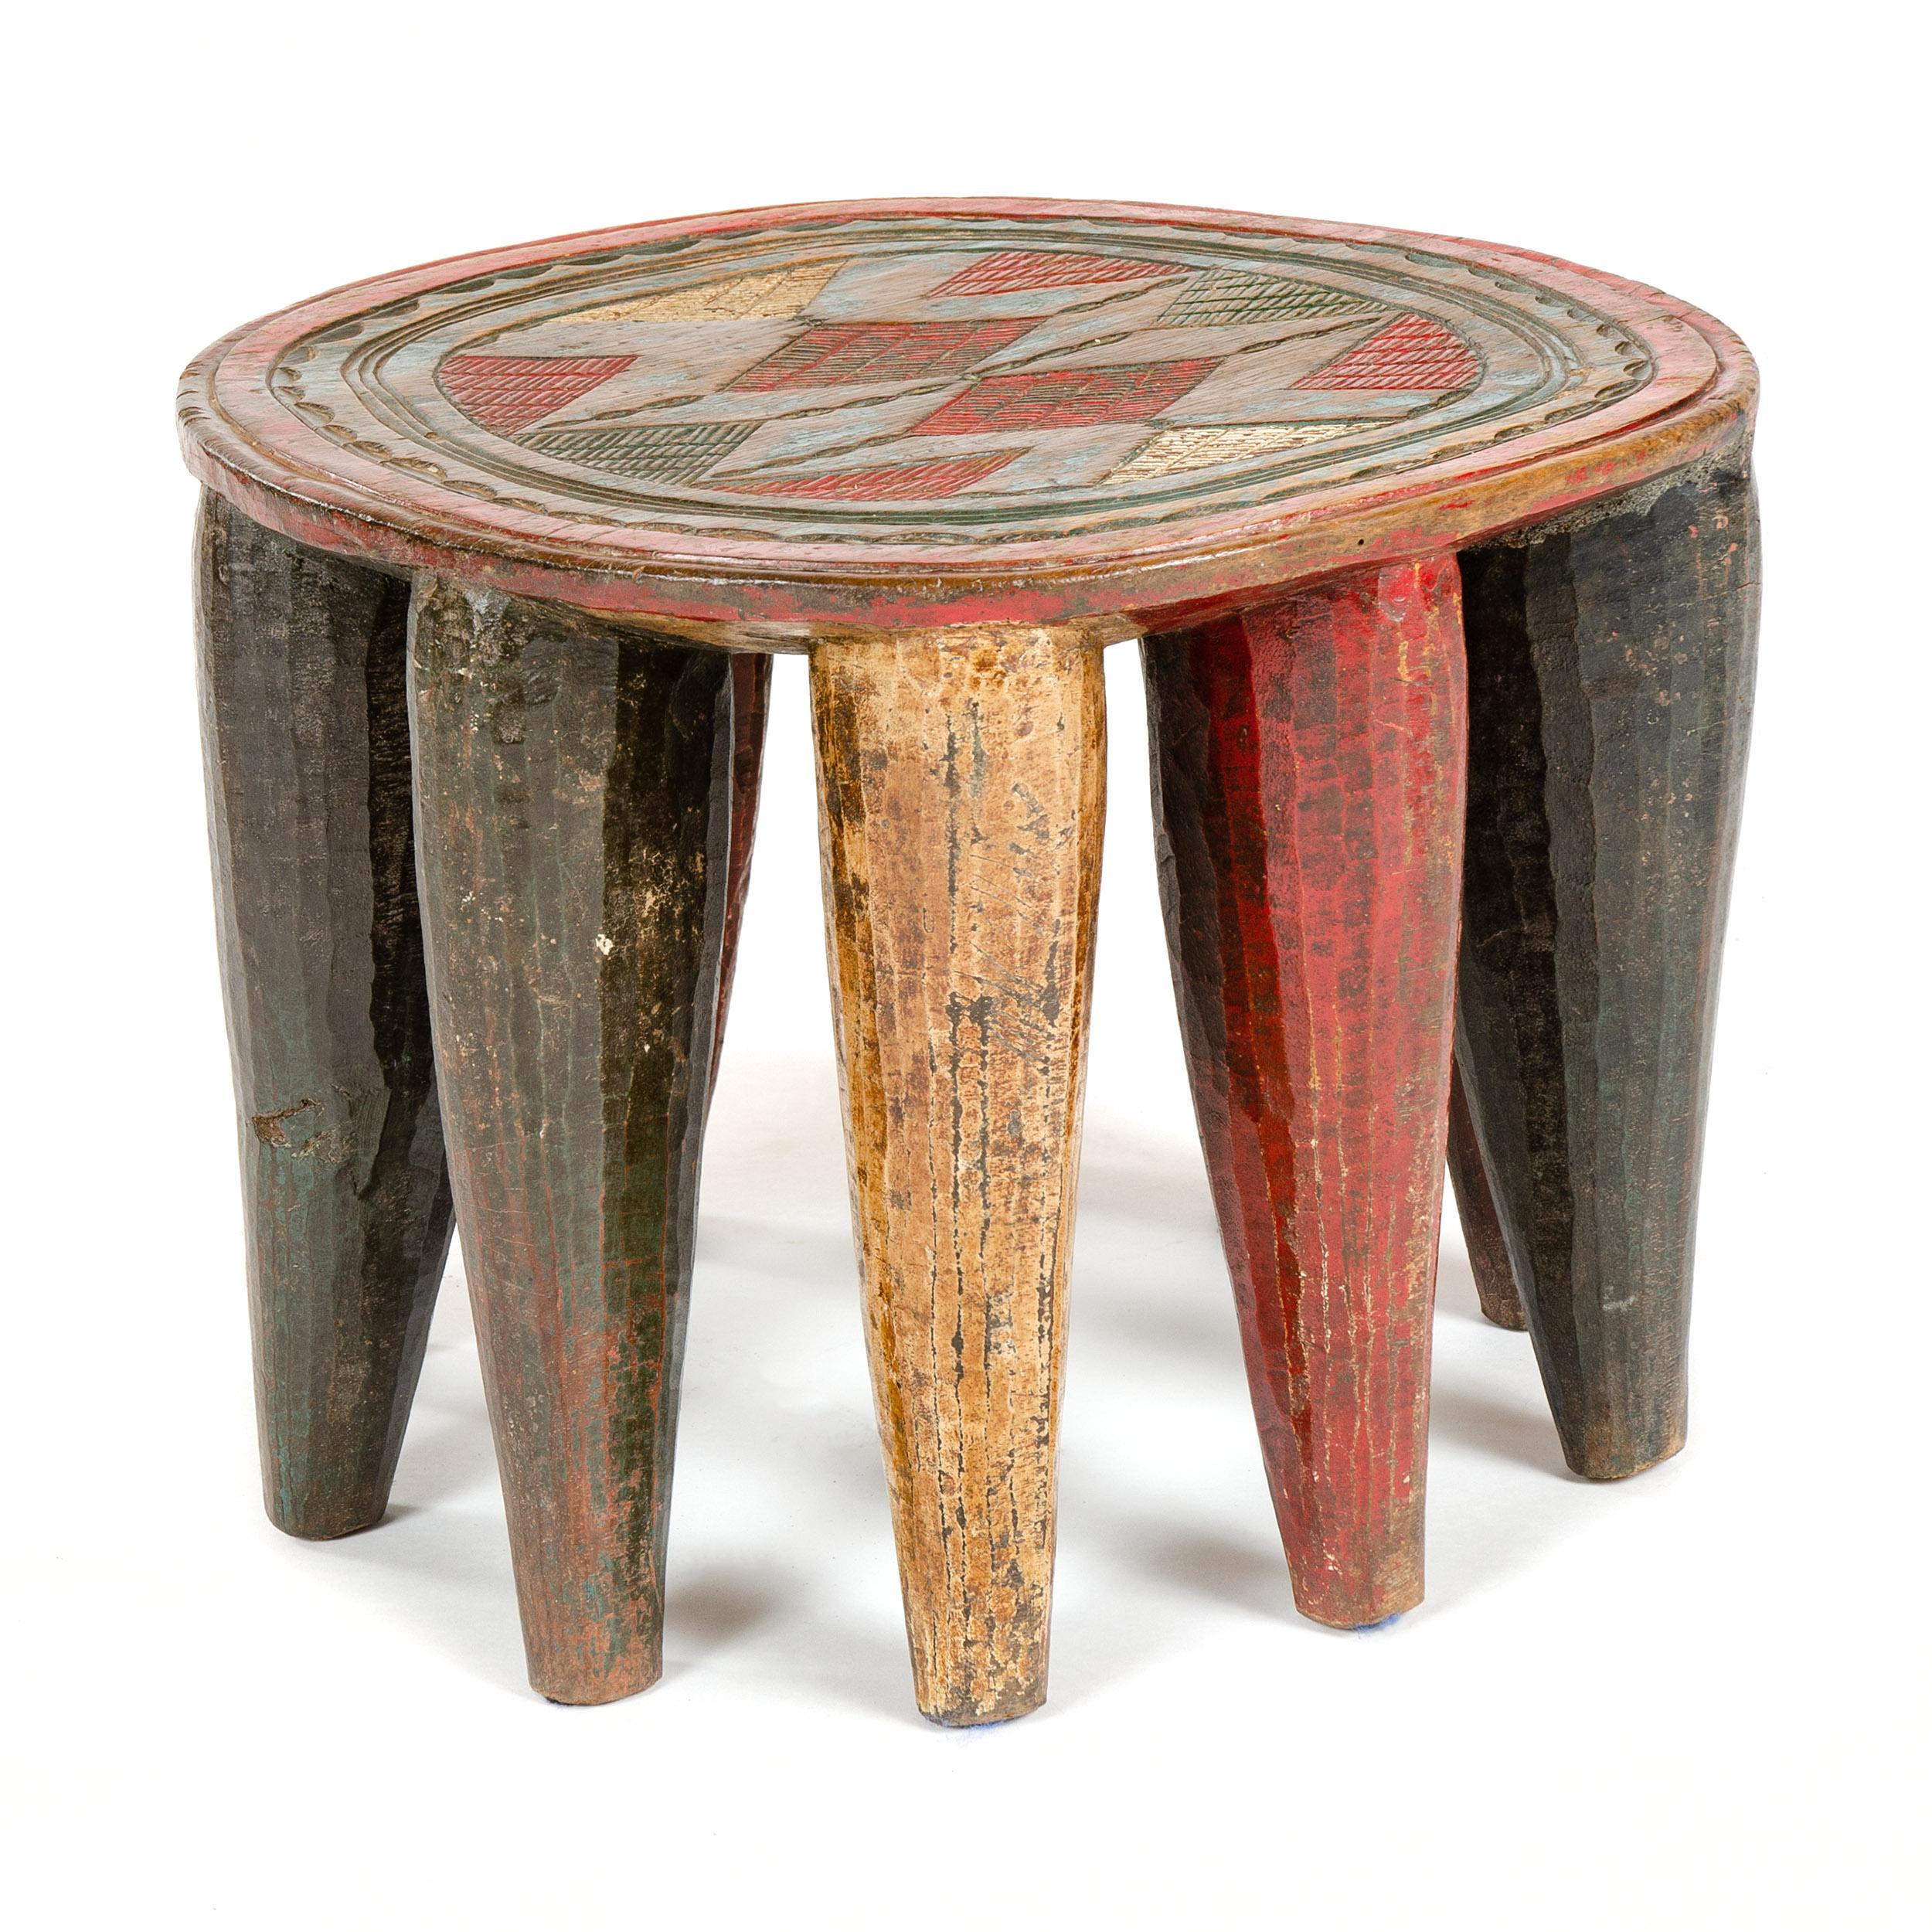 A vintage and intricately carved ten legged stool from the Nupe tribe of Nigeria.